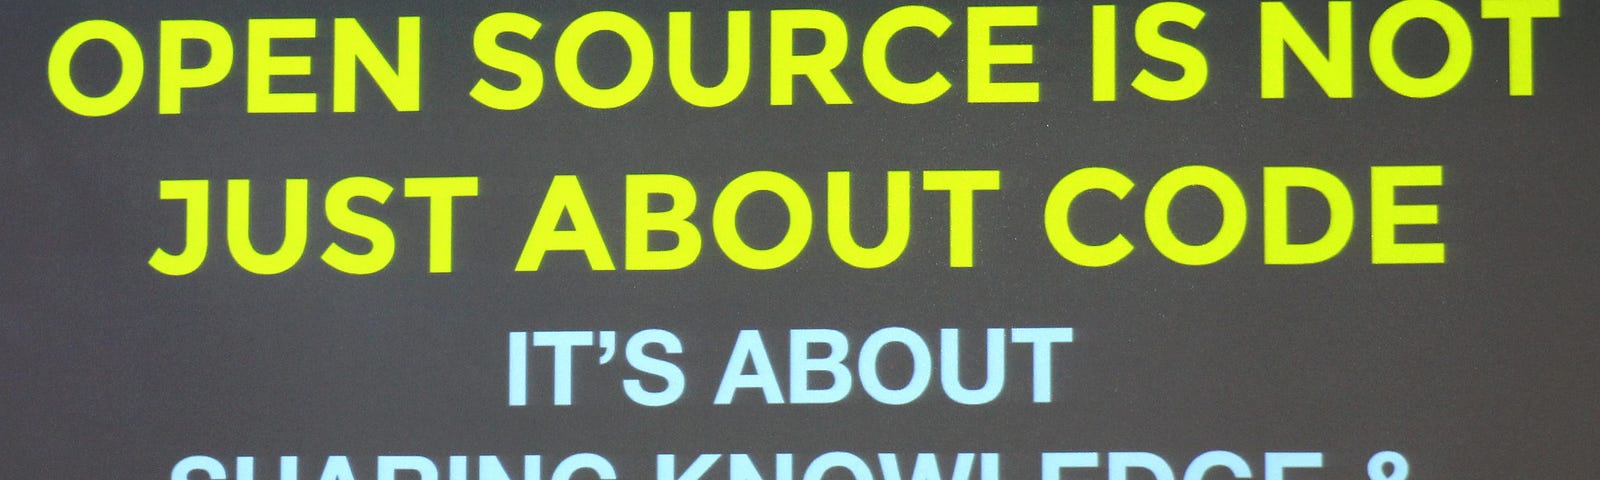 Open source is not jut about code: It’s about sharing knowledge and our collective success.